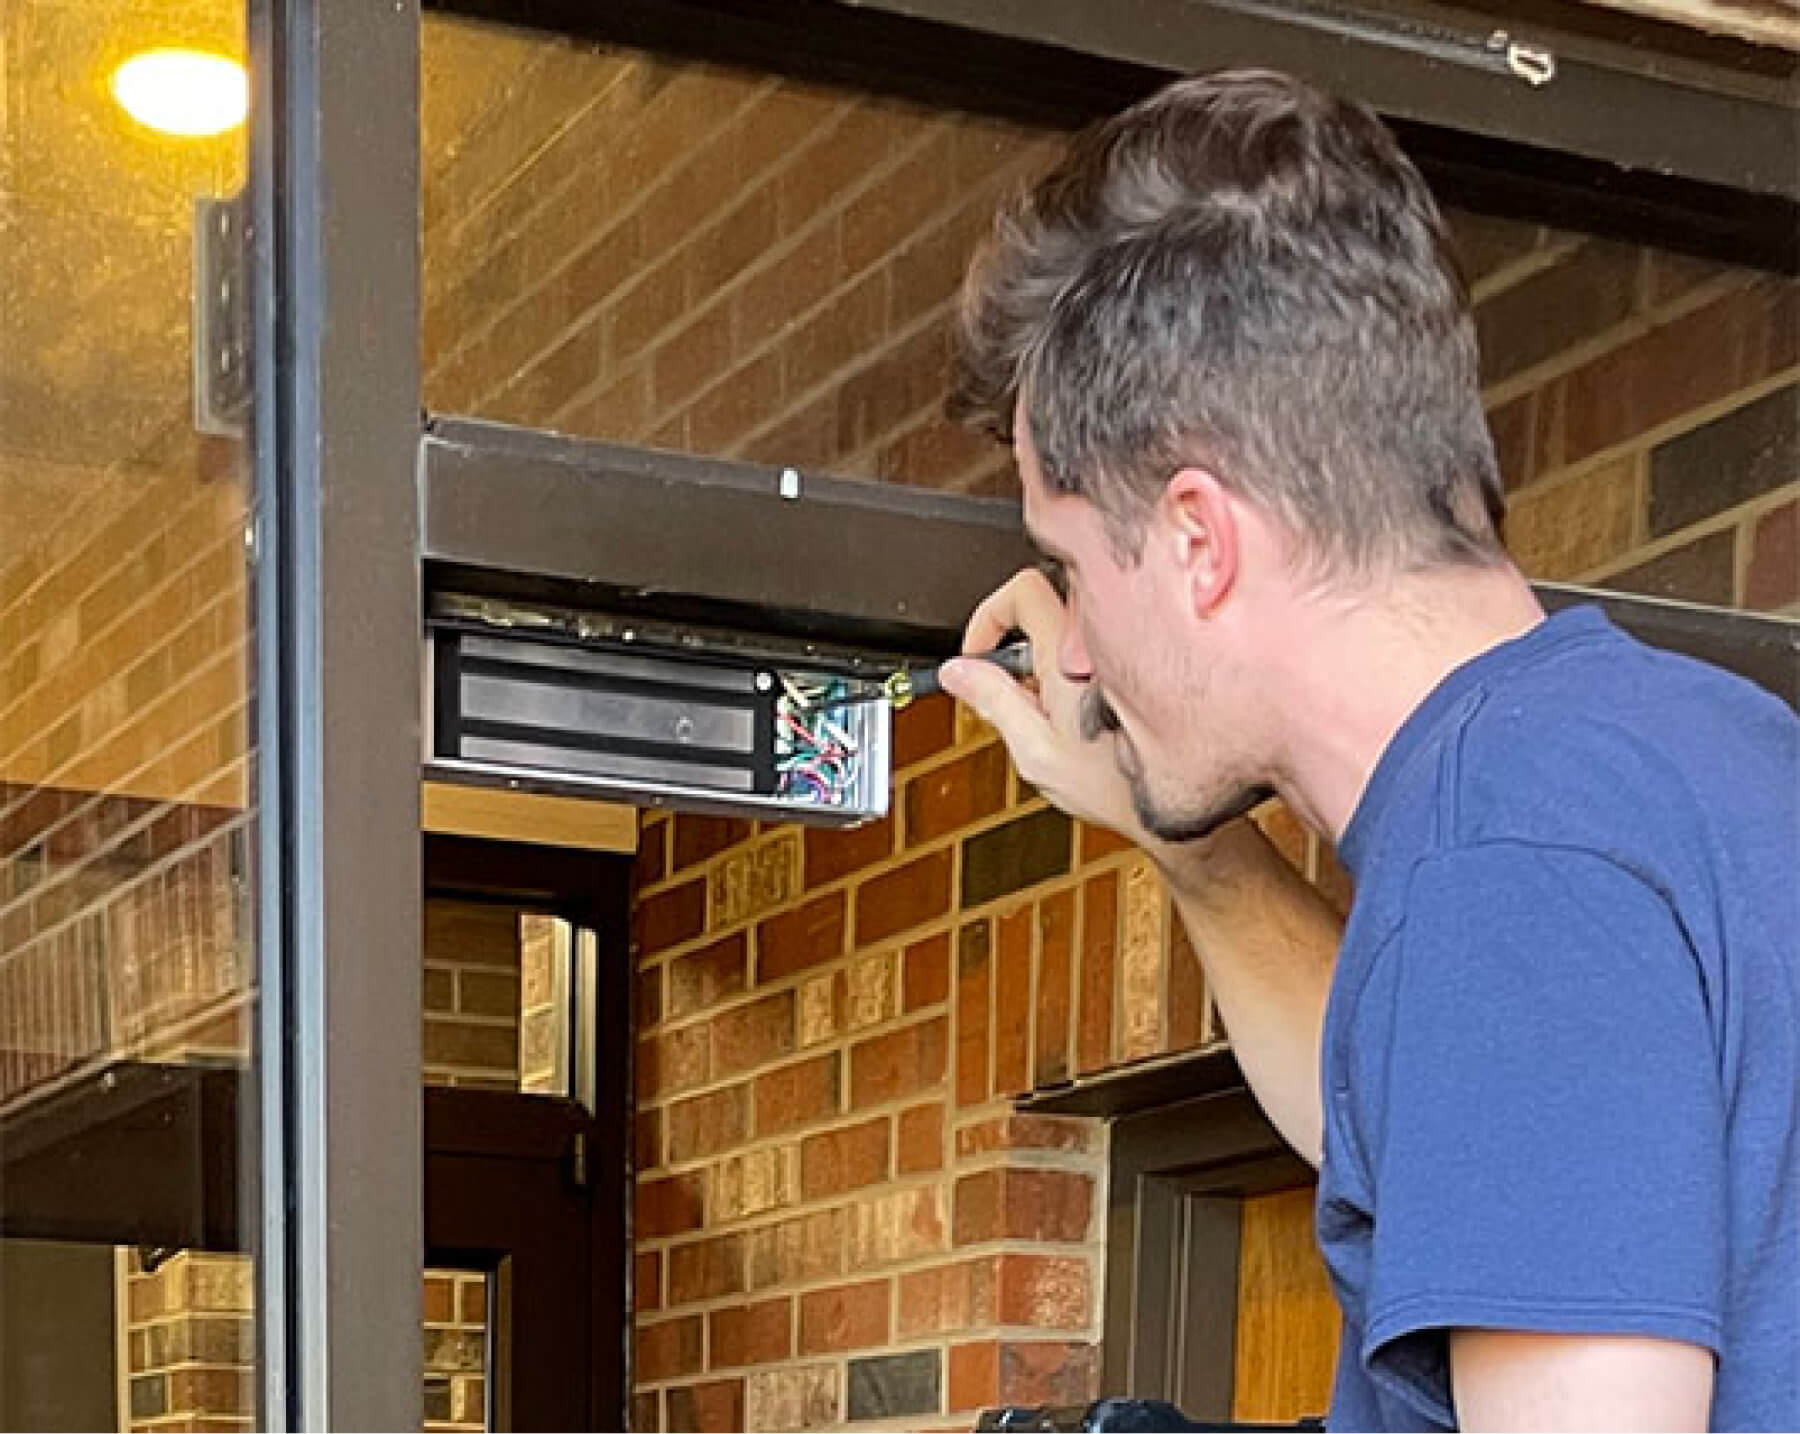 Marmic fire staffer performing maintenance on a door magnetic lock